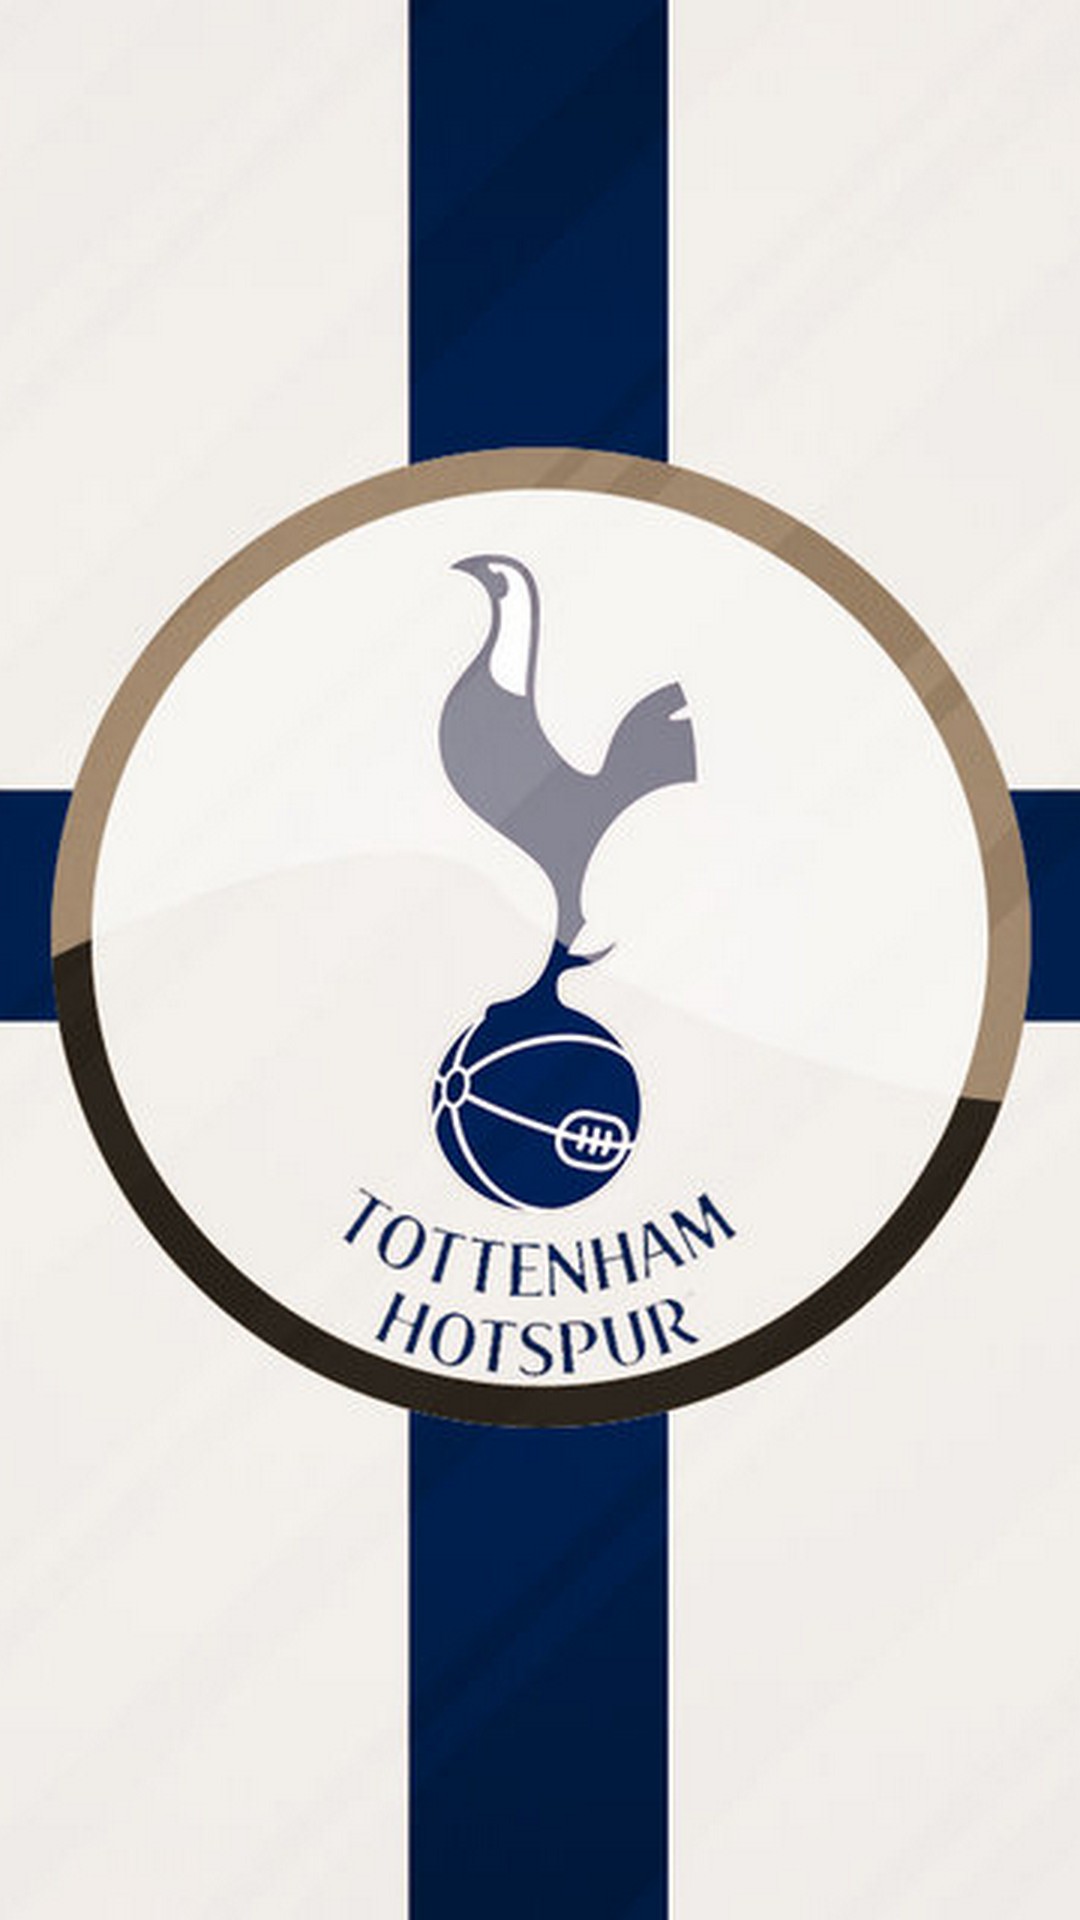 Tottenham Hotspur HD Wallpaper For iPhone With high-resolution 1080X1920 pixel. You can use this wallpaper for your Desktop Computers, Mac Screensavers, Windows Backgrounds, iPhone Wallpapers, Tablet or Android Lock screen and another Mobile device